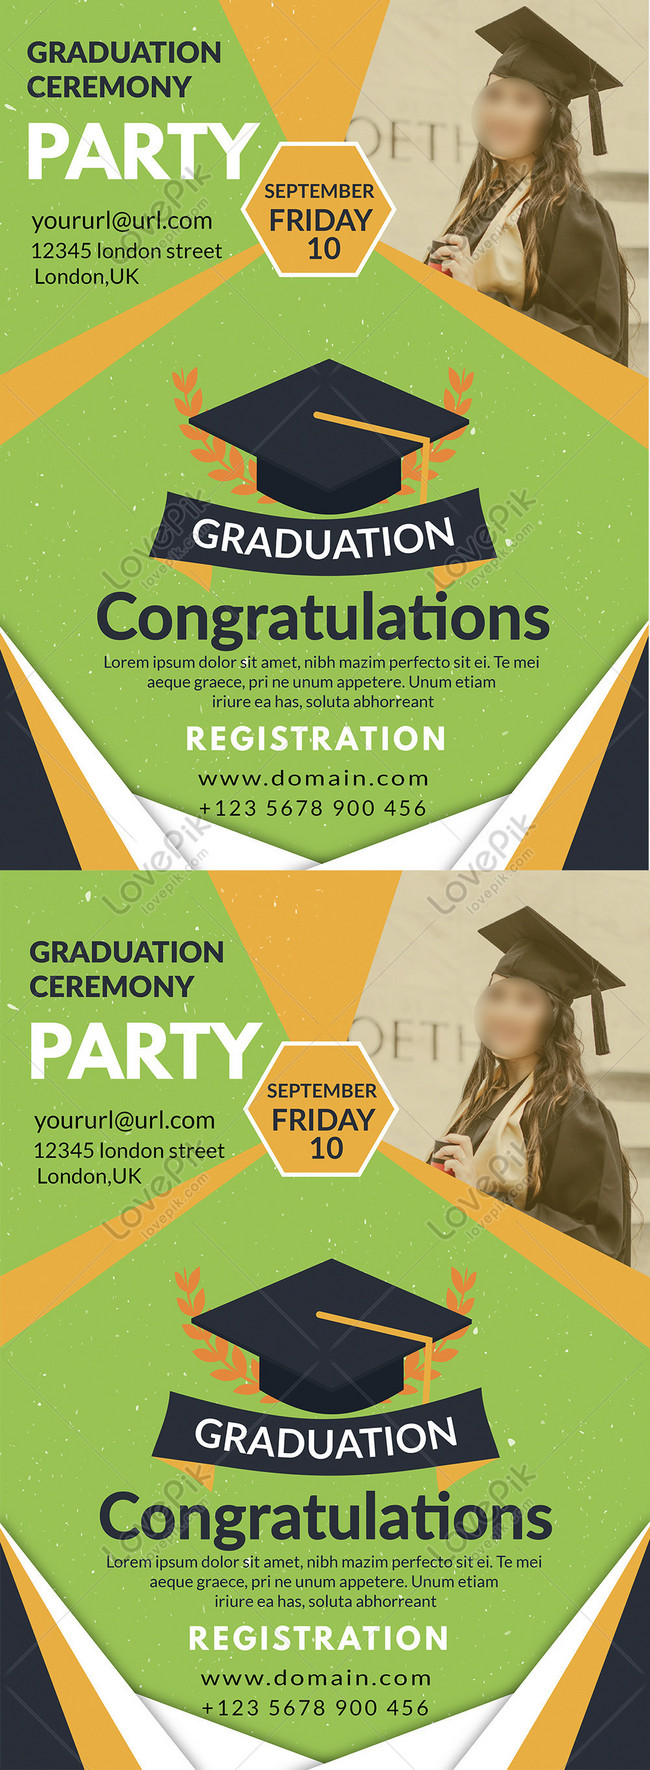 Latest graduation party flyer template image_picture free download Within Graduation Party Flyer Template